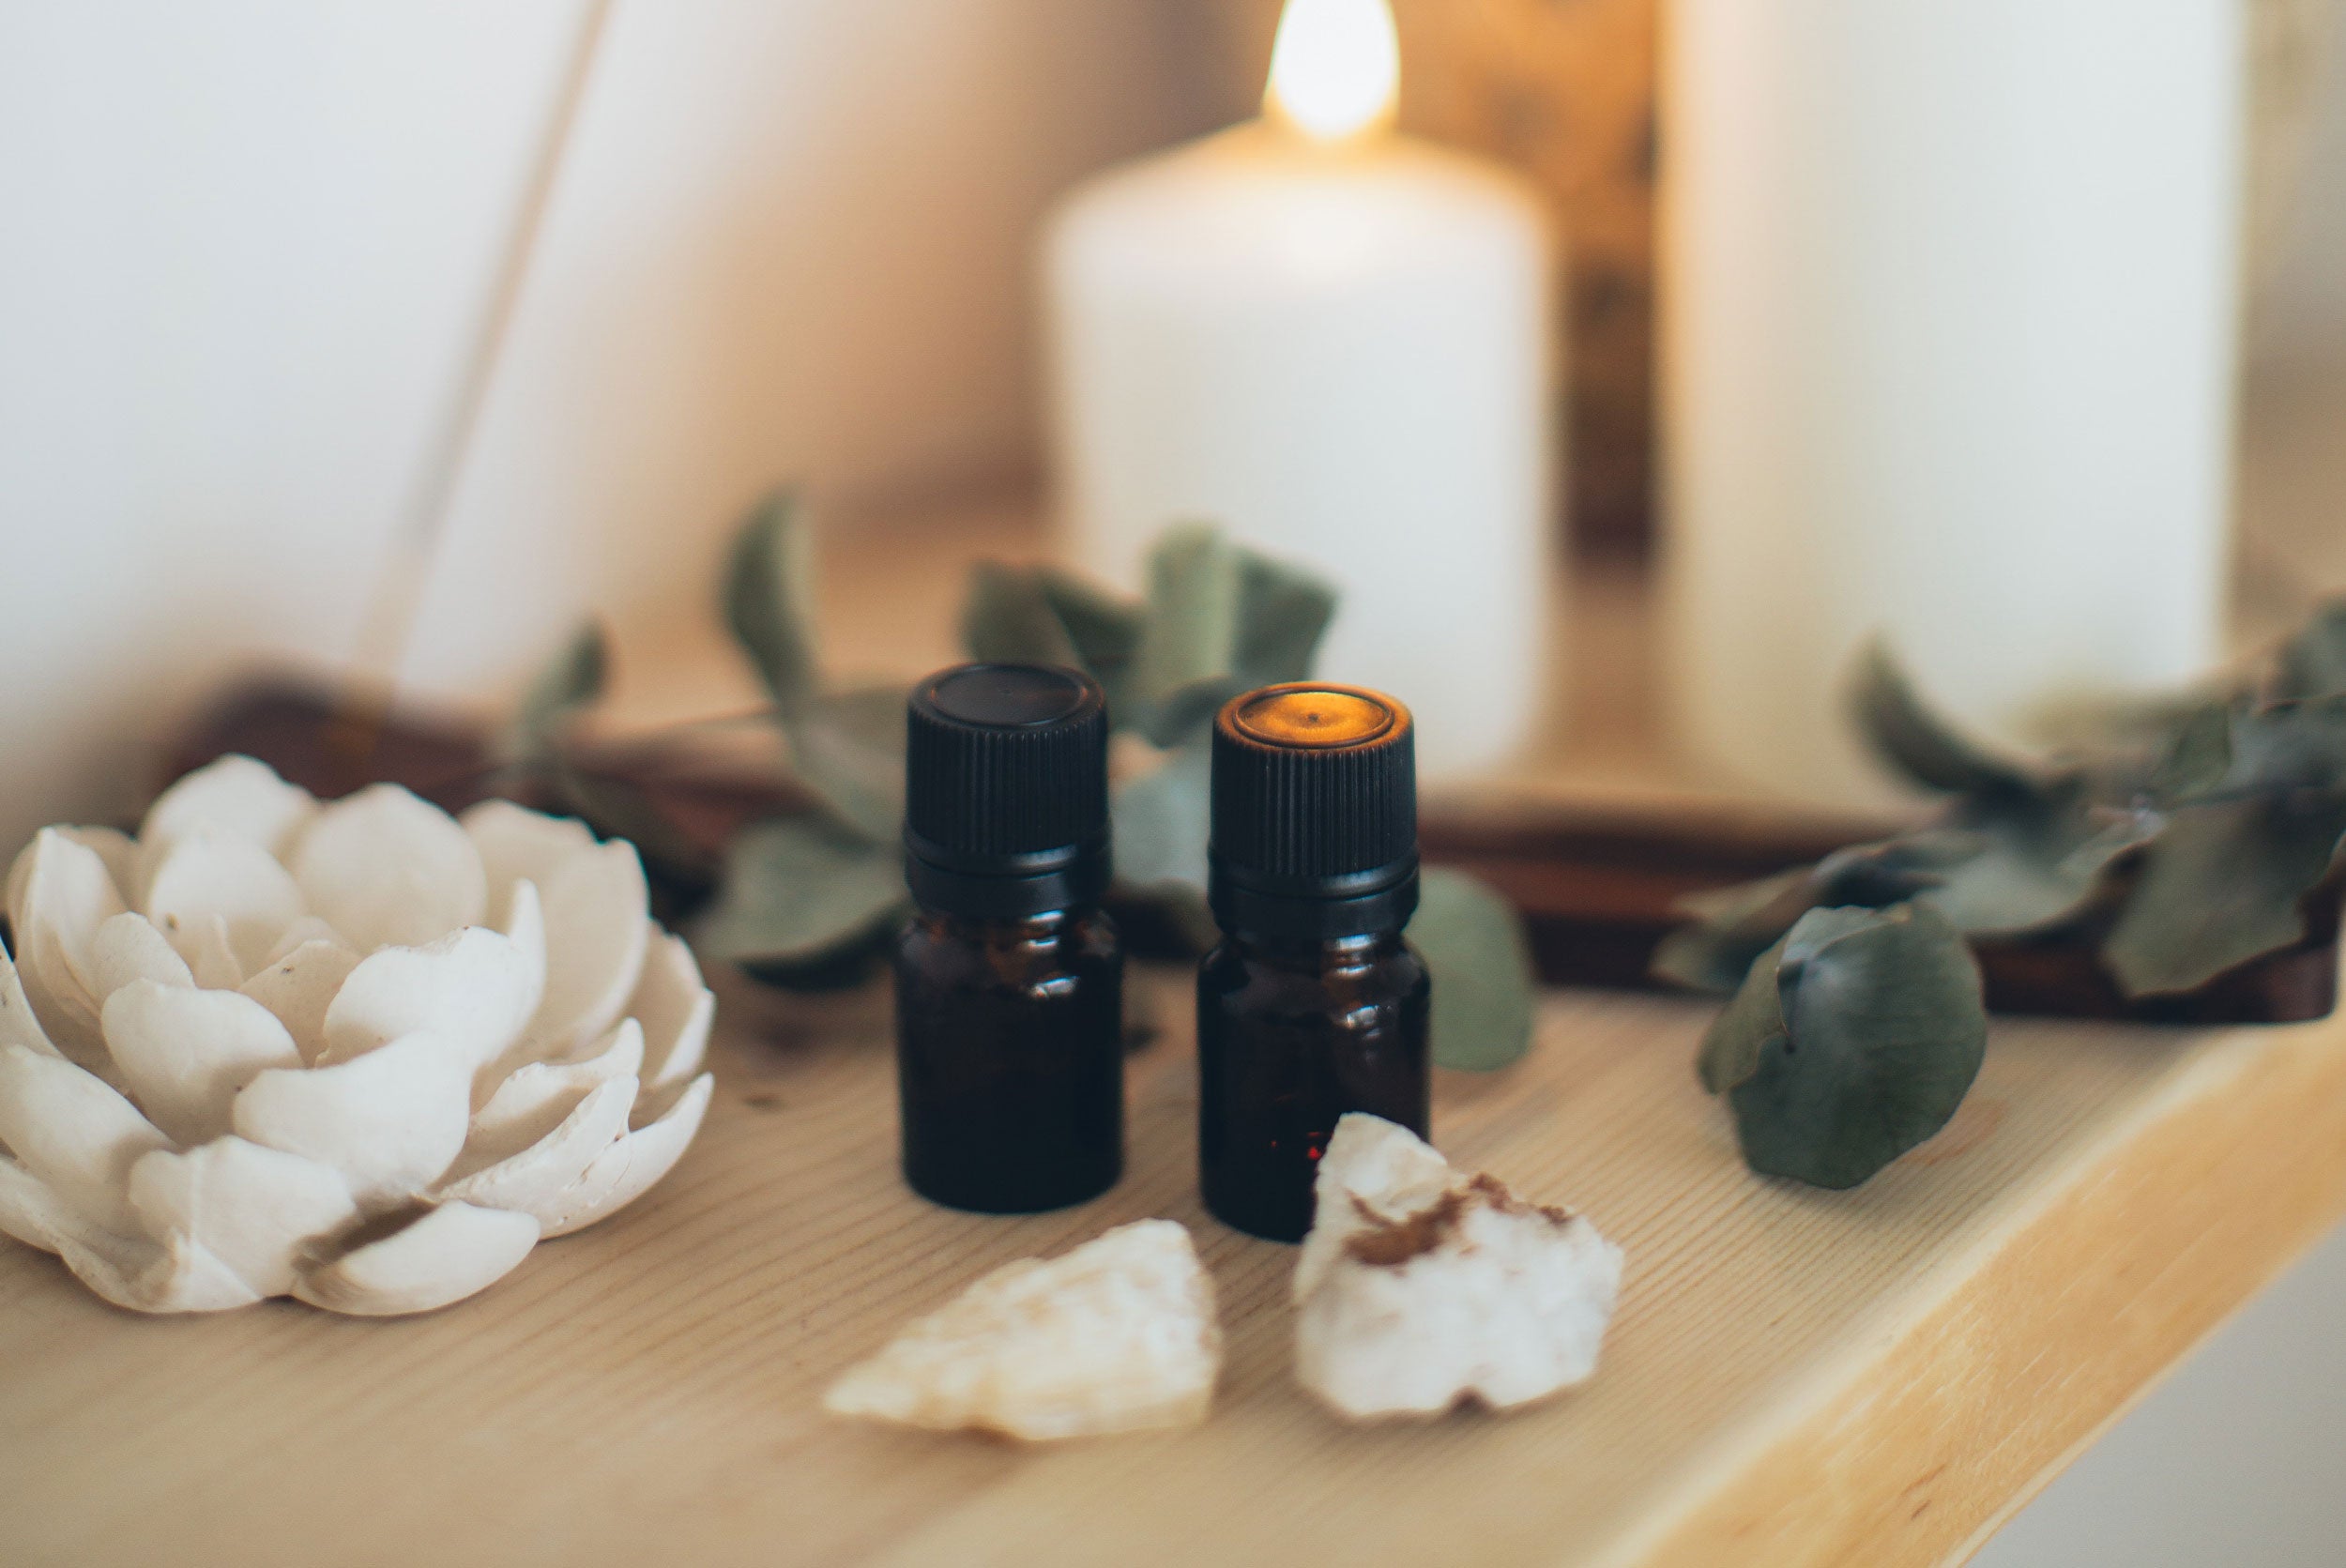 The Art of Aromatherapy: How Essential Oils Can Promote Health and Well-Being